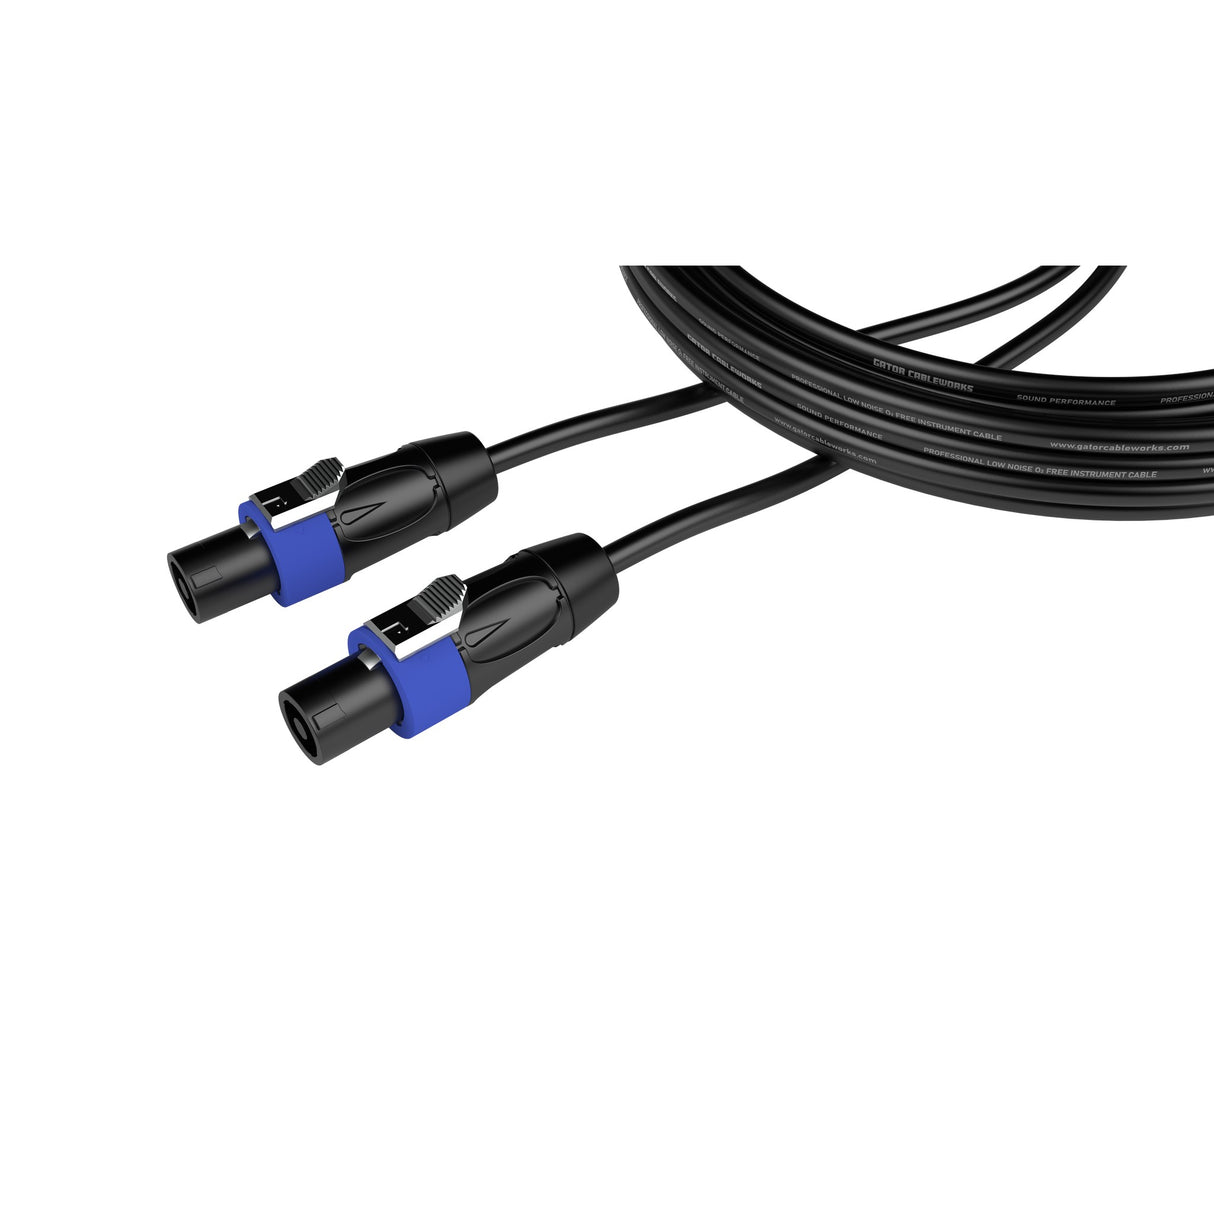 Gator CBW-CPSRSPKR2TWLK-CBLE-6 Composer Series Twist Lock Connector to Twist Lock Connector Speaker Cable, 6-Foot